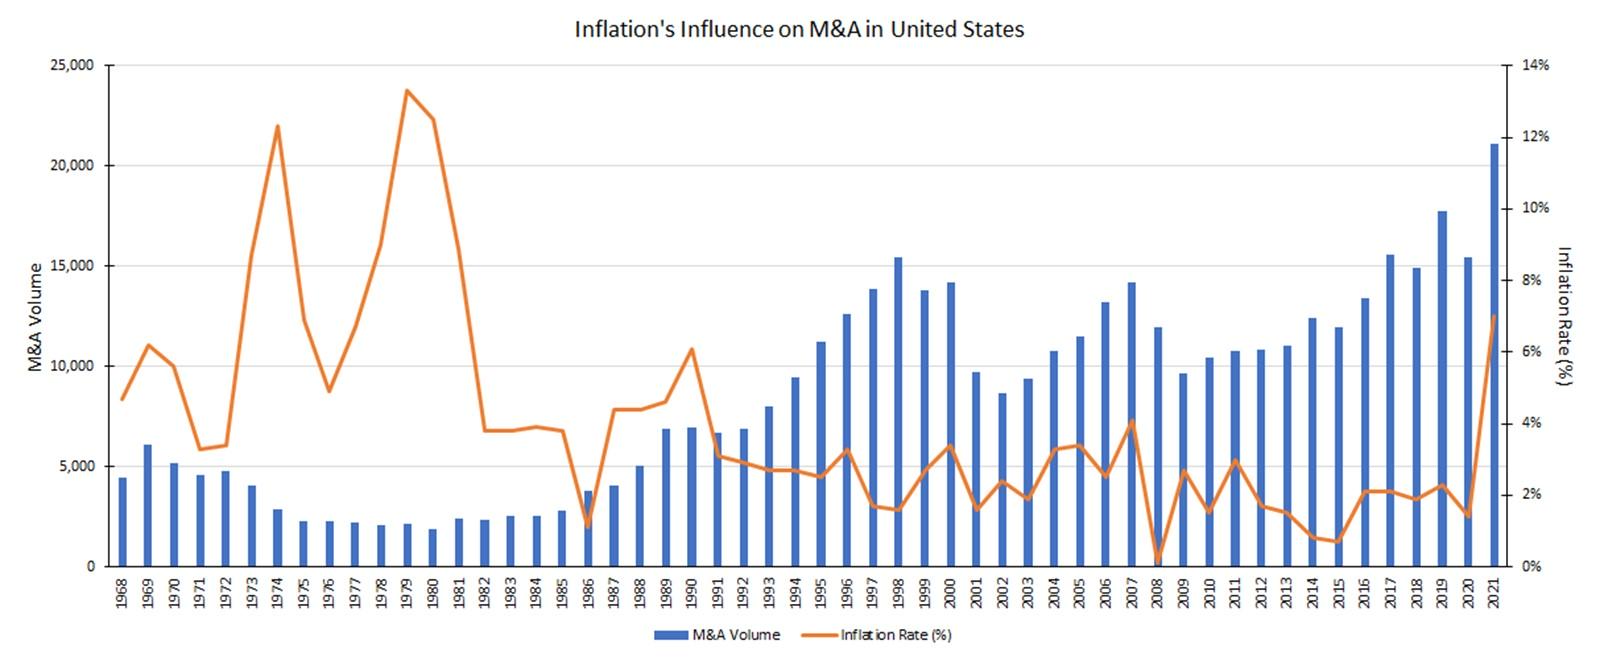 inflation's influence on m&a in united states